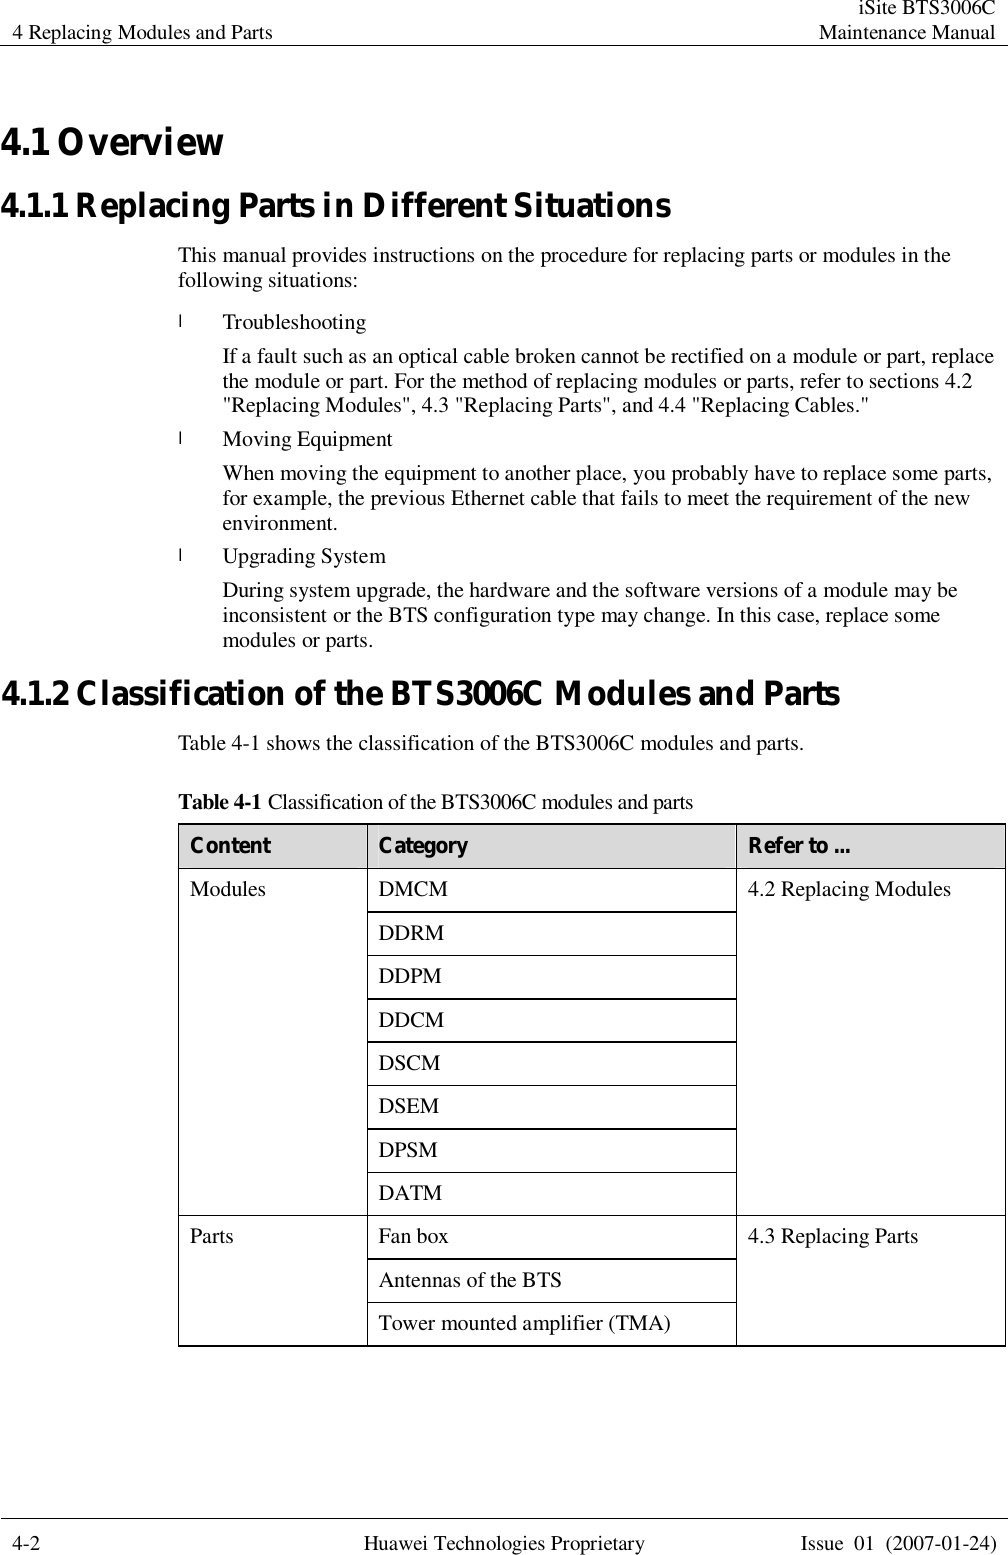 4 Replacing Modules and Parts  iSite BTS3006C Maintenance Manual  4-2 Huawei Technologies Proprietary Issue 01 (2007-01-24)  4.1 Overview 4.1.1 Replacing Parts in Different Situations This manual provides instructions on the procedure for replacing parts or modules in the following situations: l Troubleshooting If a fault such as an optical cable broken cannot be rectified on a module or part, replace the module or part. For the method of replacing modules or parts, refer to sections 4.2 &quot;Replacing Modules&quot;, 4.3 &quot;Replacing Parts&quot;, and 4.4 &quot;Replacing Cables.&quot; l Moving Equipment When moving the equipment to another place, you probably have to replace some parts, for example, the previous Ethernet cable that fails to meet the requirement of the new environment. l Upgrading System During system upgrade, the hardware and the software versions of a module may be inconsistent or the BTS configuration type may change. In this case, replace some modules or parts. 4.1.2 Classification of the BTS3006C Modules and Parts Table 4-1 shows the classification of the BTS3006C modules and parts. Table 4-1 Classification of the BTS3006C modules and parts Content  Category  Refer to ... DMCM DDRM DDPM DDCM DSCM DSEM DPSM Modules DATM 4.2 Replacing Modules Fan box Antennas of the BTS Parts Tower mounted amplifier (TMA) 4.3 Replacing Parts 